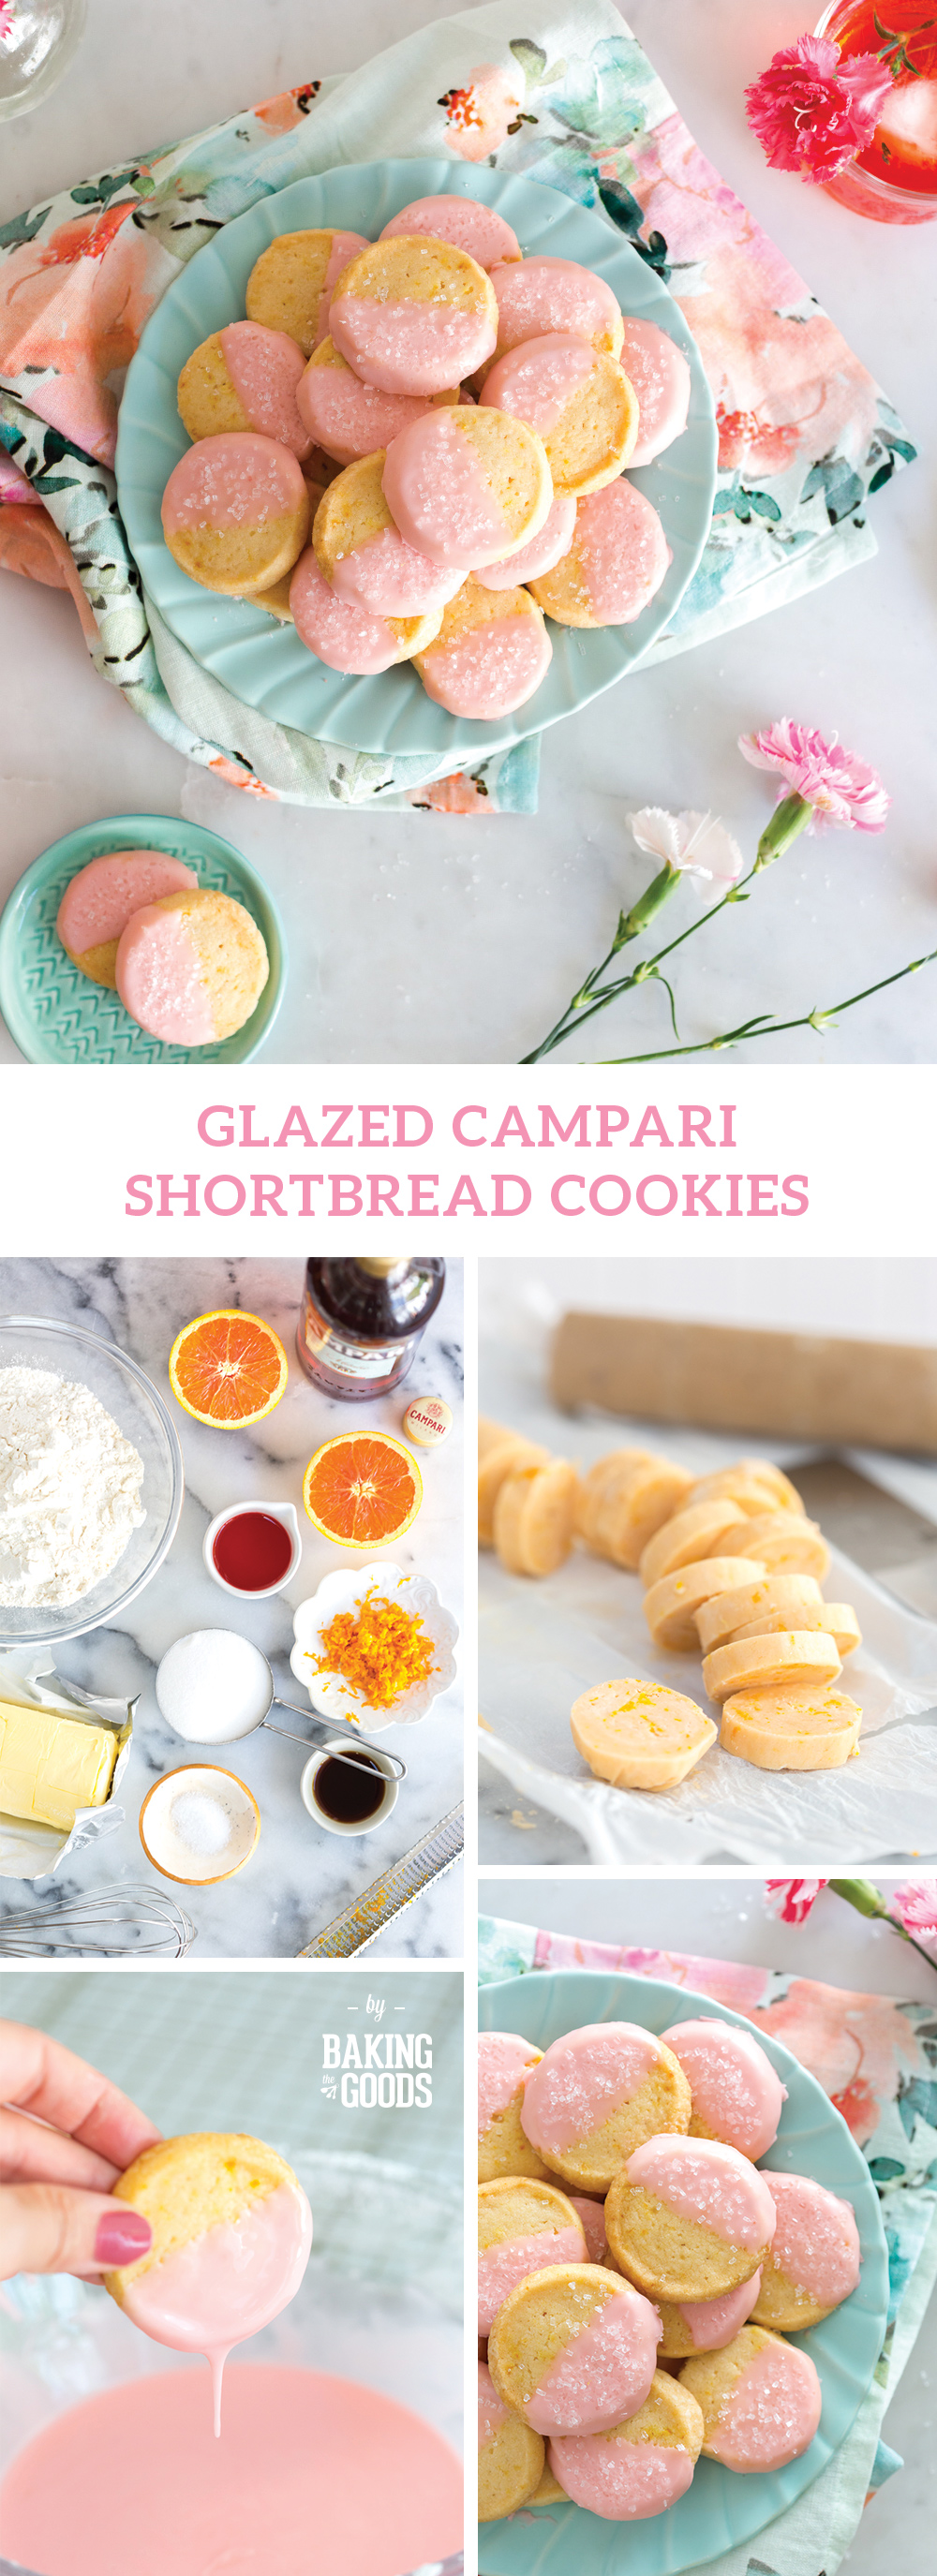 Glazed Campari Shortbread Cookies by Baking The Goods